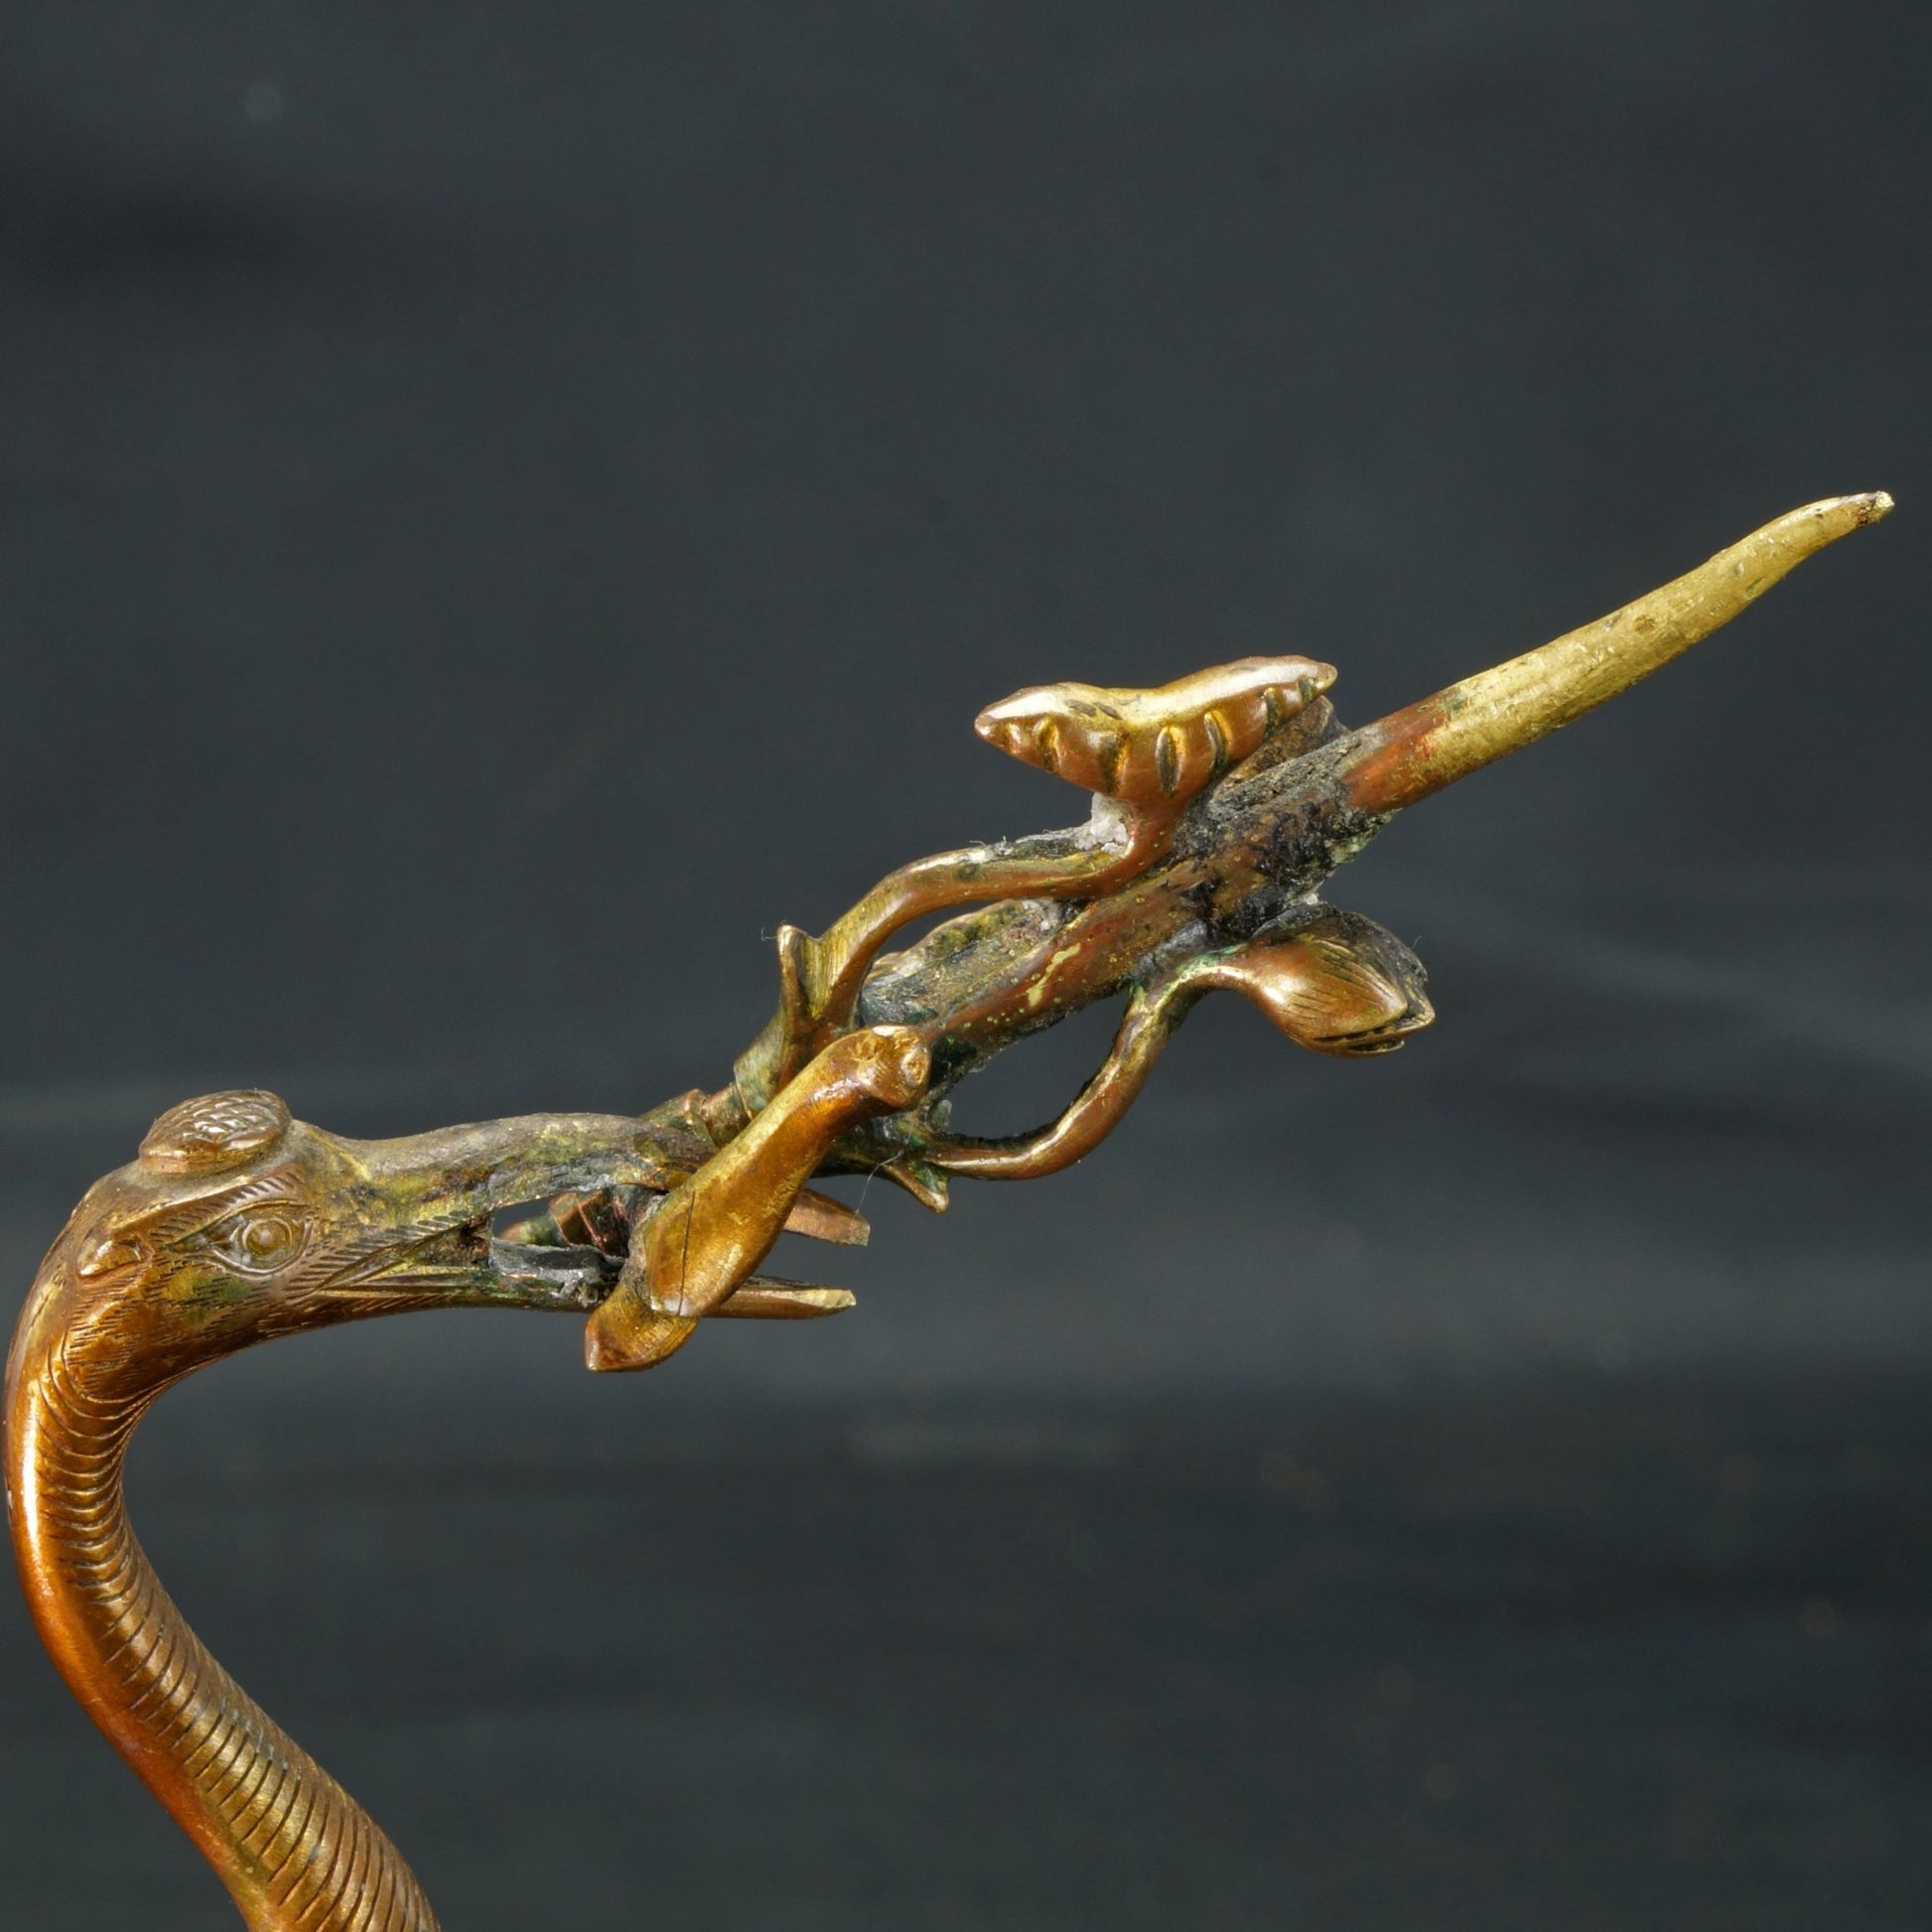 Antique Chinese Gilt Bronze Crane Figure Incense Holder 18th/19th Century - Bear and Raven Antiques